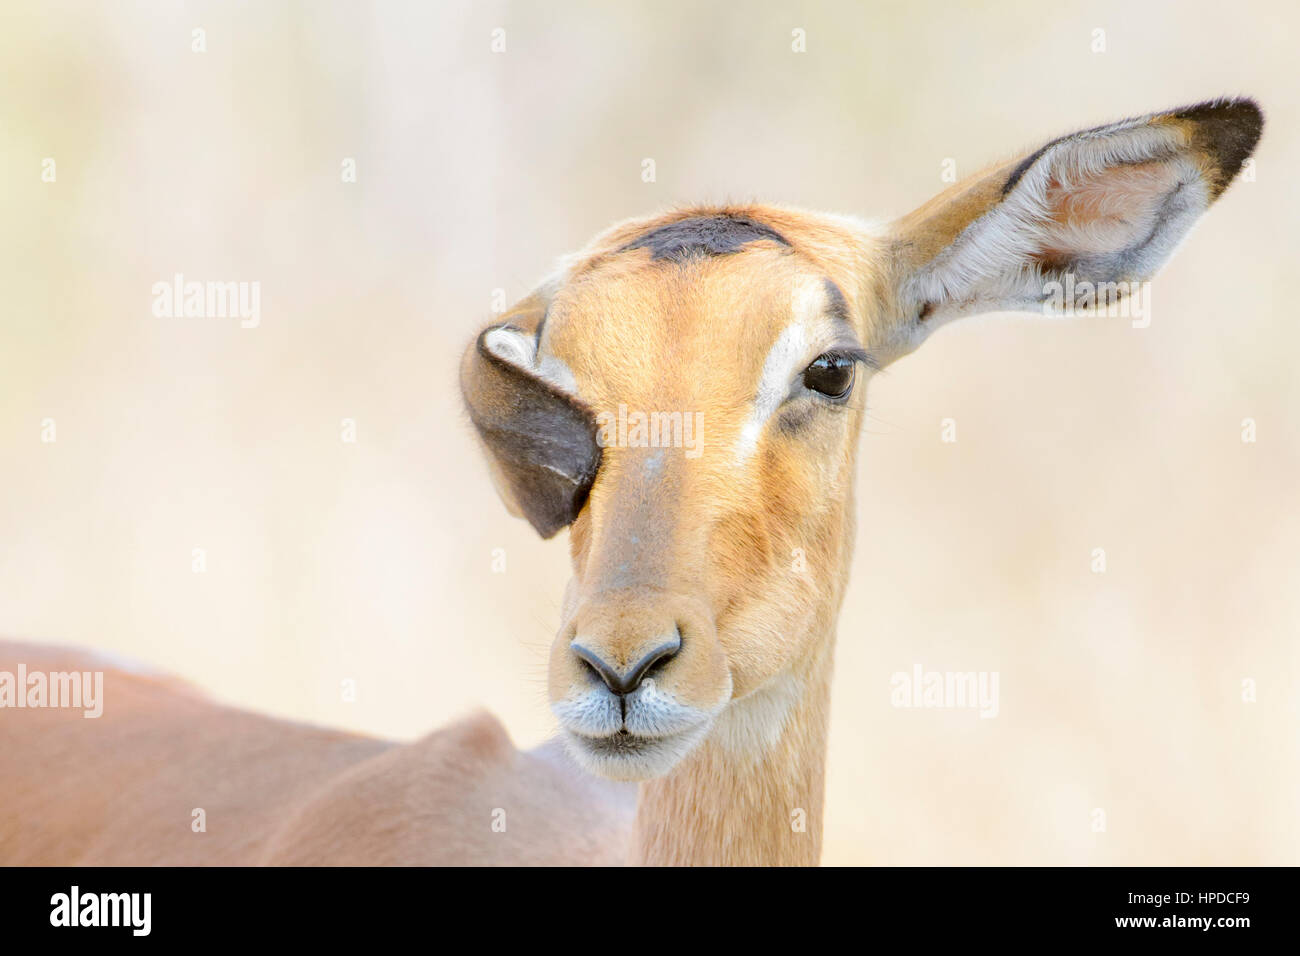 Impala (Aepyceros melampus) portrait with flapping ears, Kruger National Park, South Africa Stock Photo